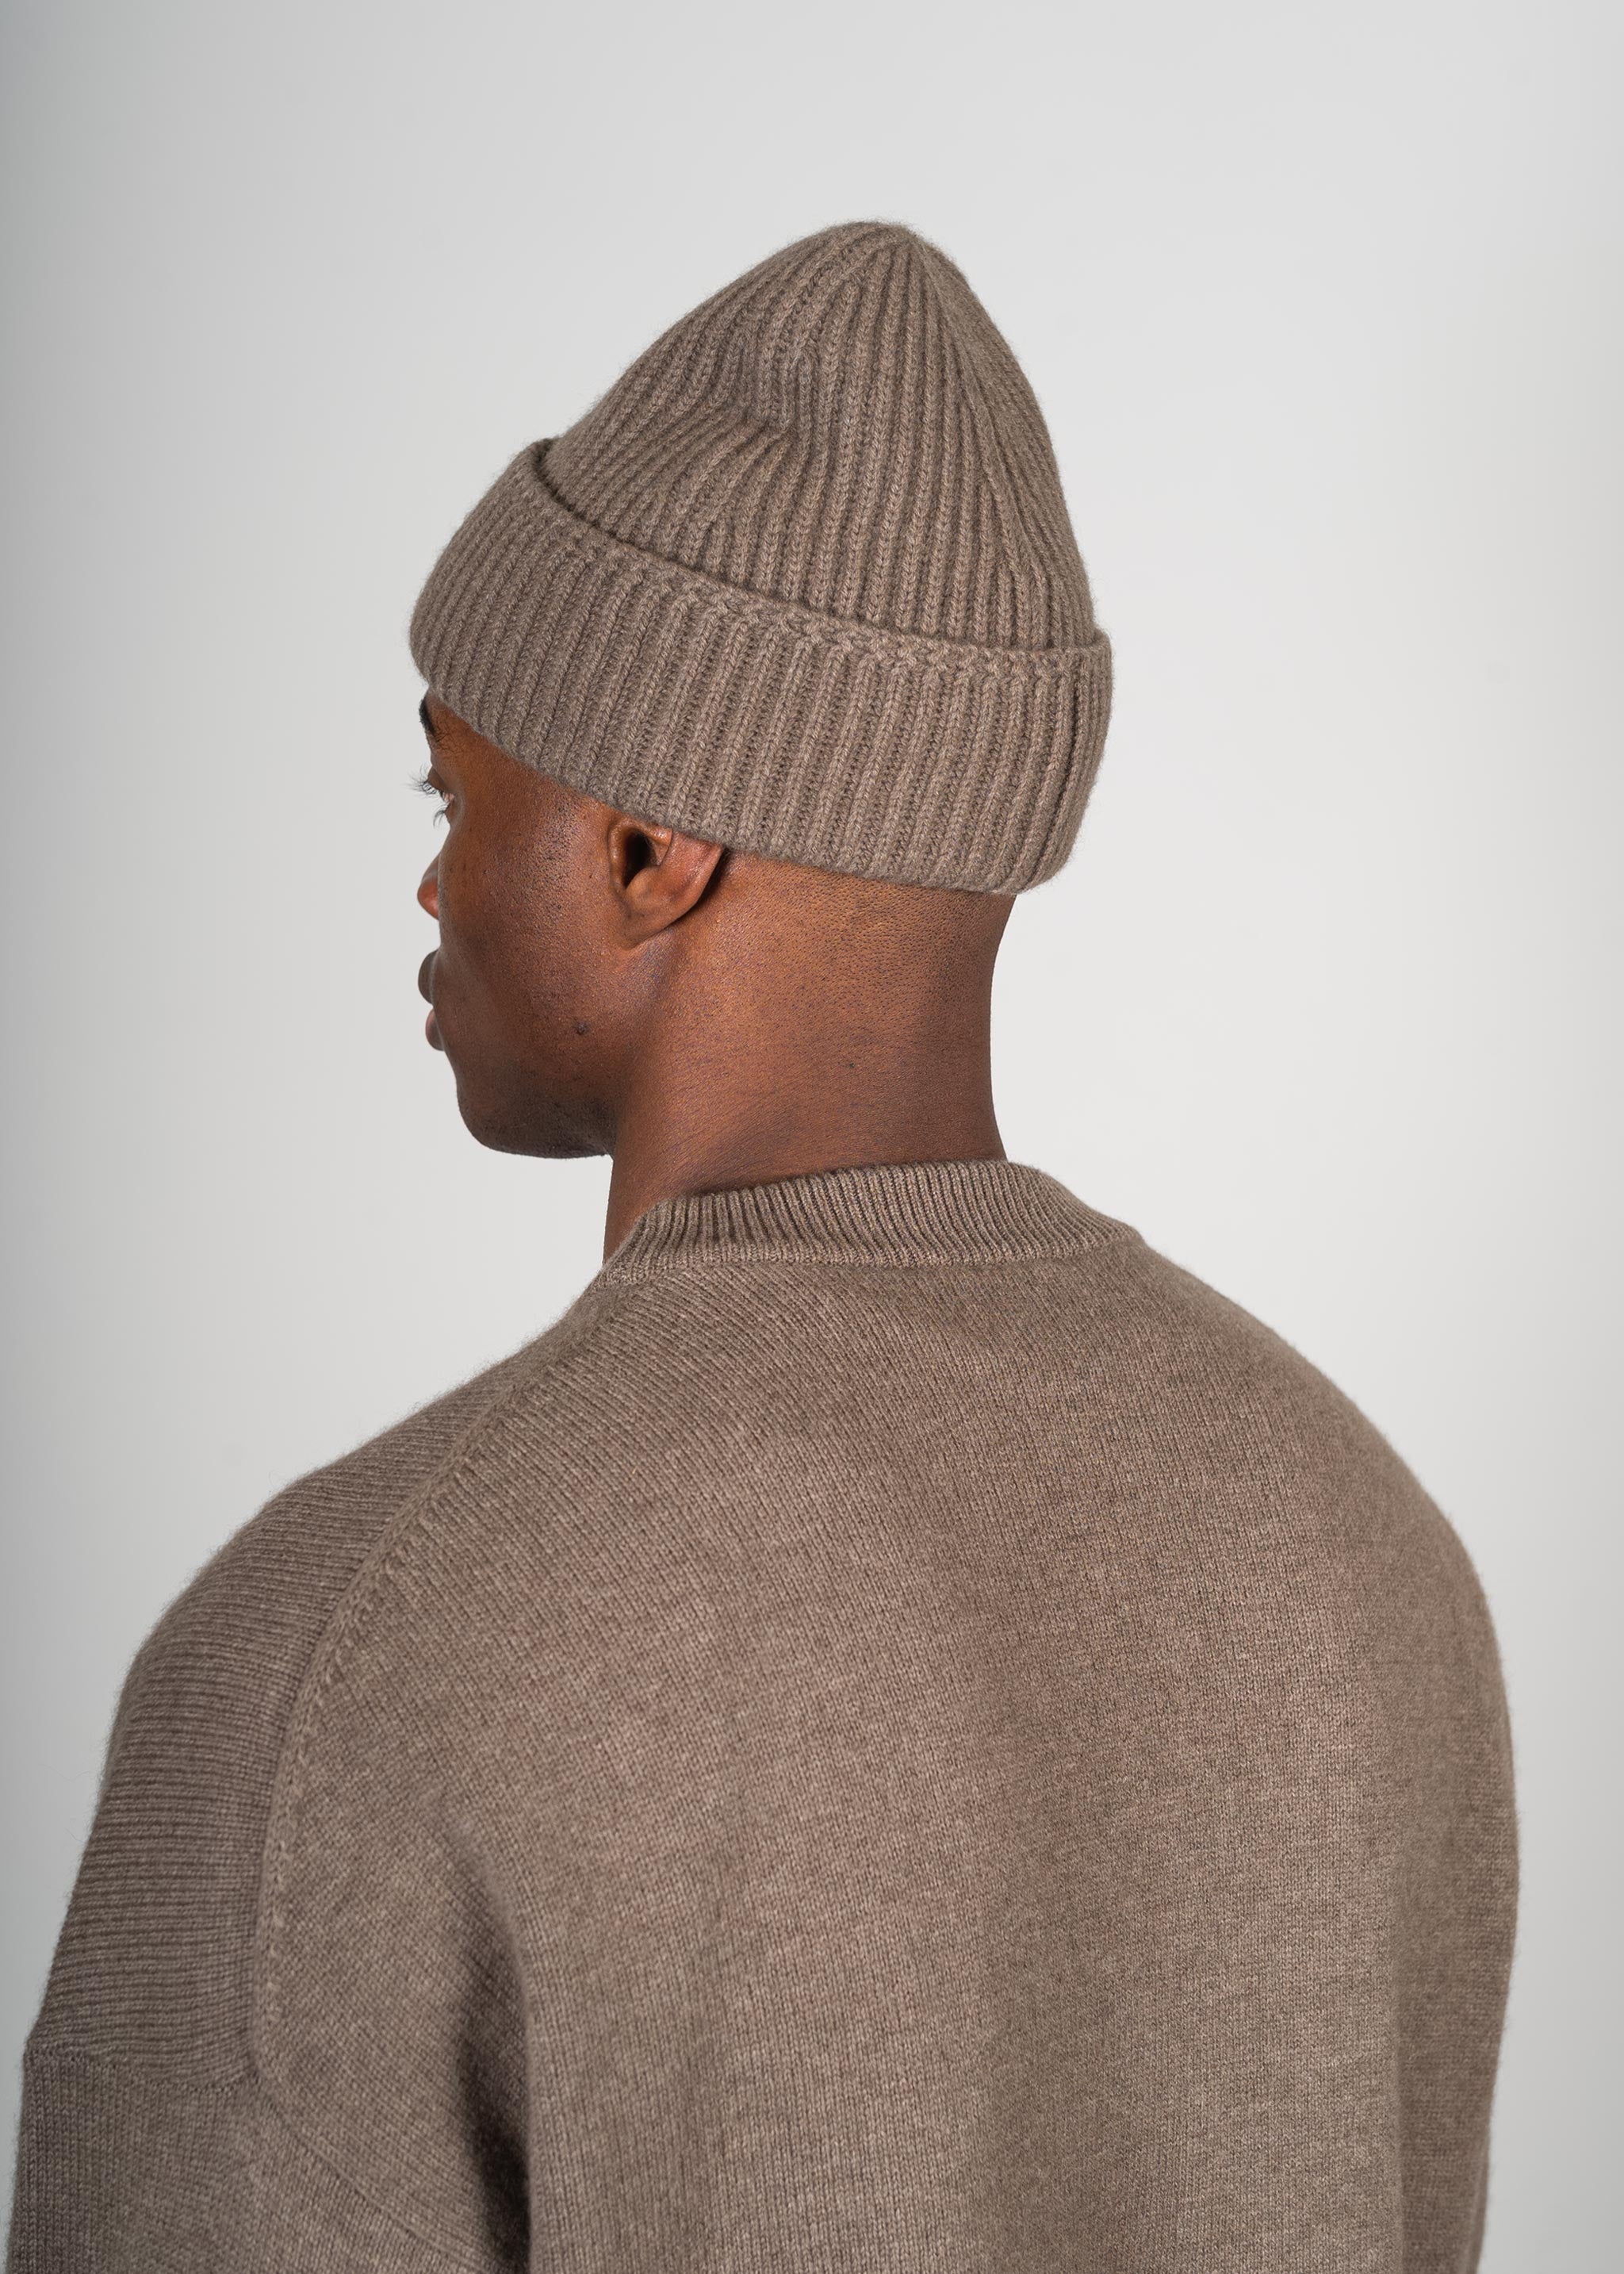 Yacaia Y-0008 Oversized Cashmere Blend Sweater - Brown